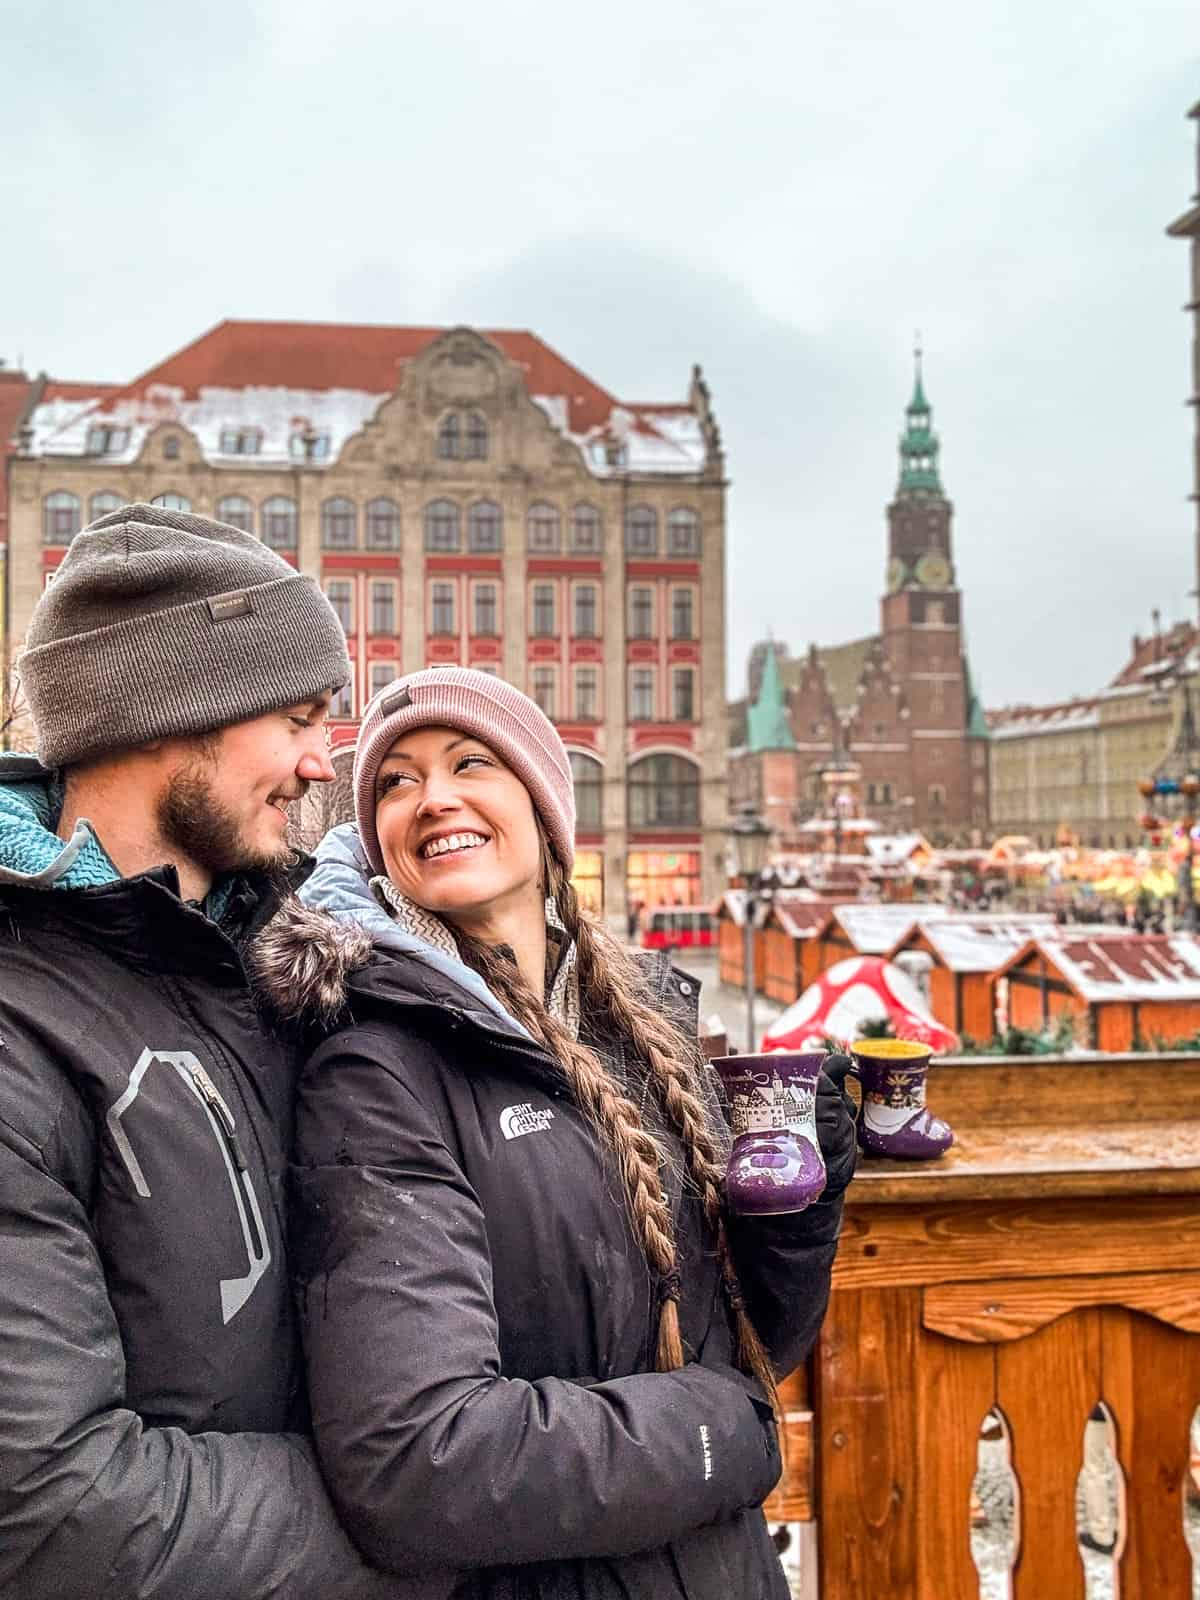 A smiling couple, holding mulled wine in festive cups, enjoys the Christmas market in Wroclaw, with the colorful facades of the town's historic buildings and a dusting of snow in the background